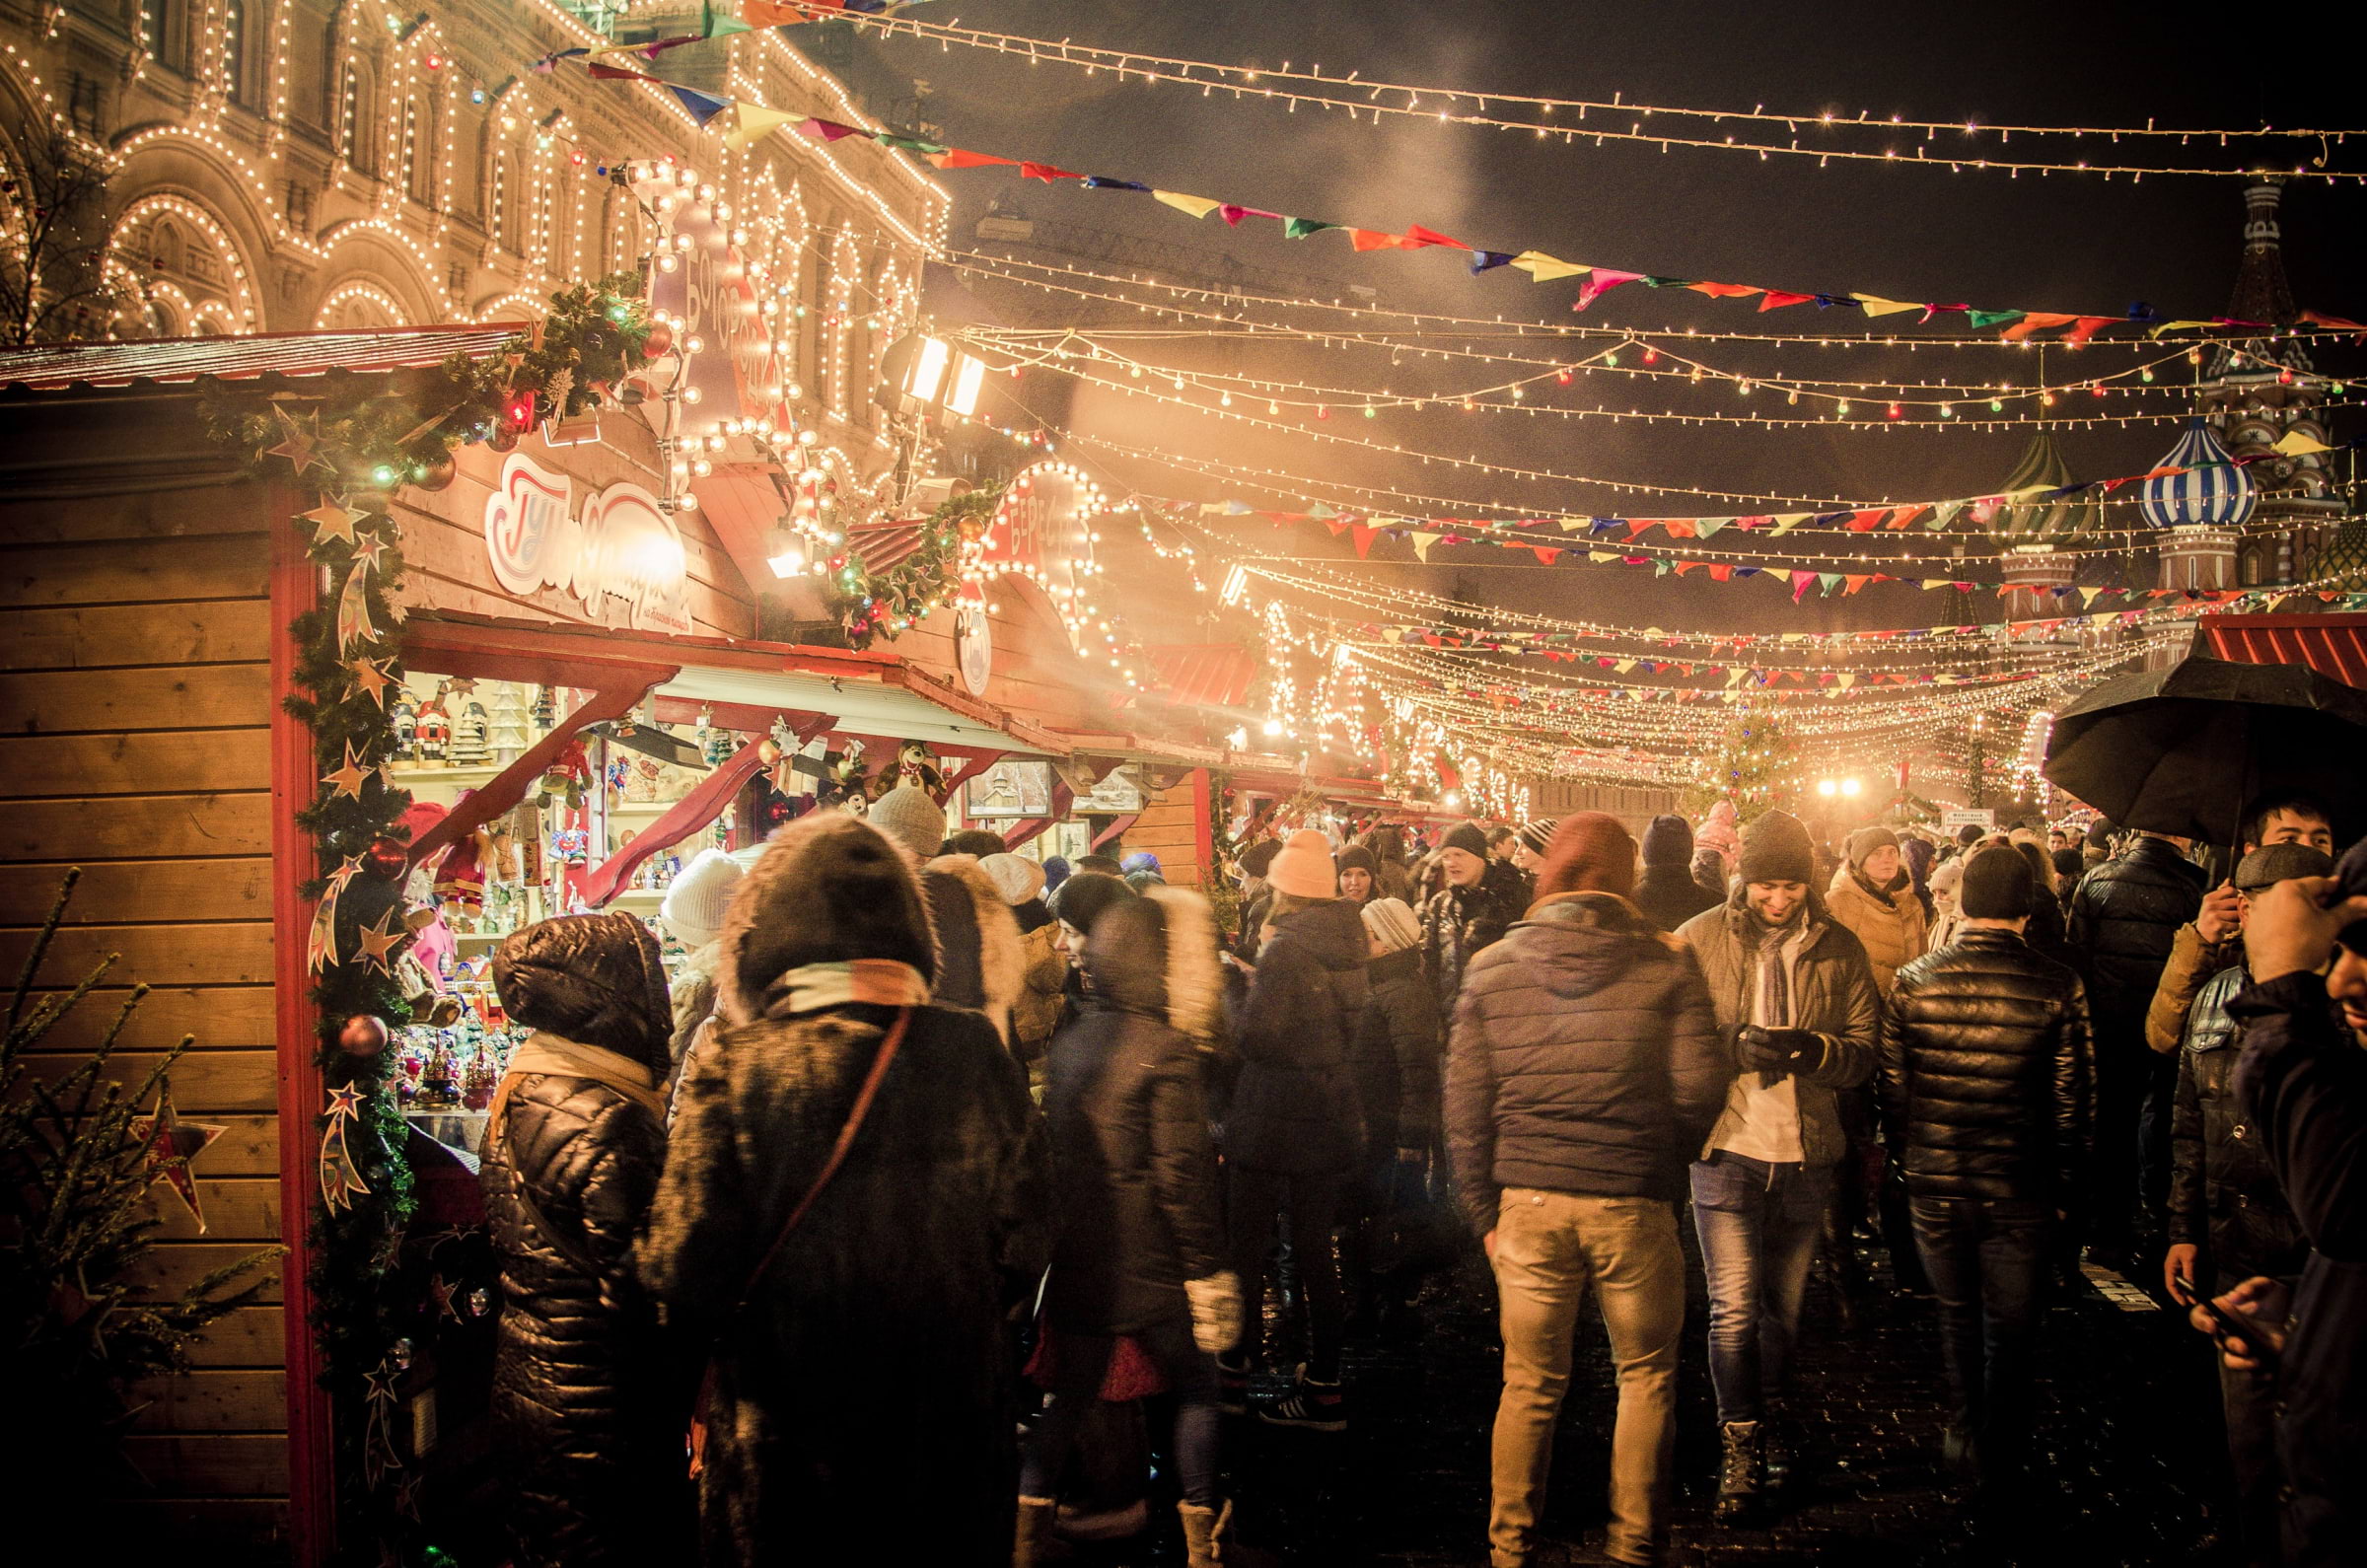 London's prettiest Christmas market is back for another year of festive fun